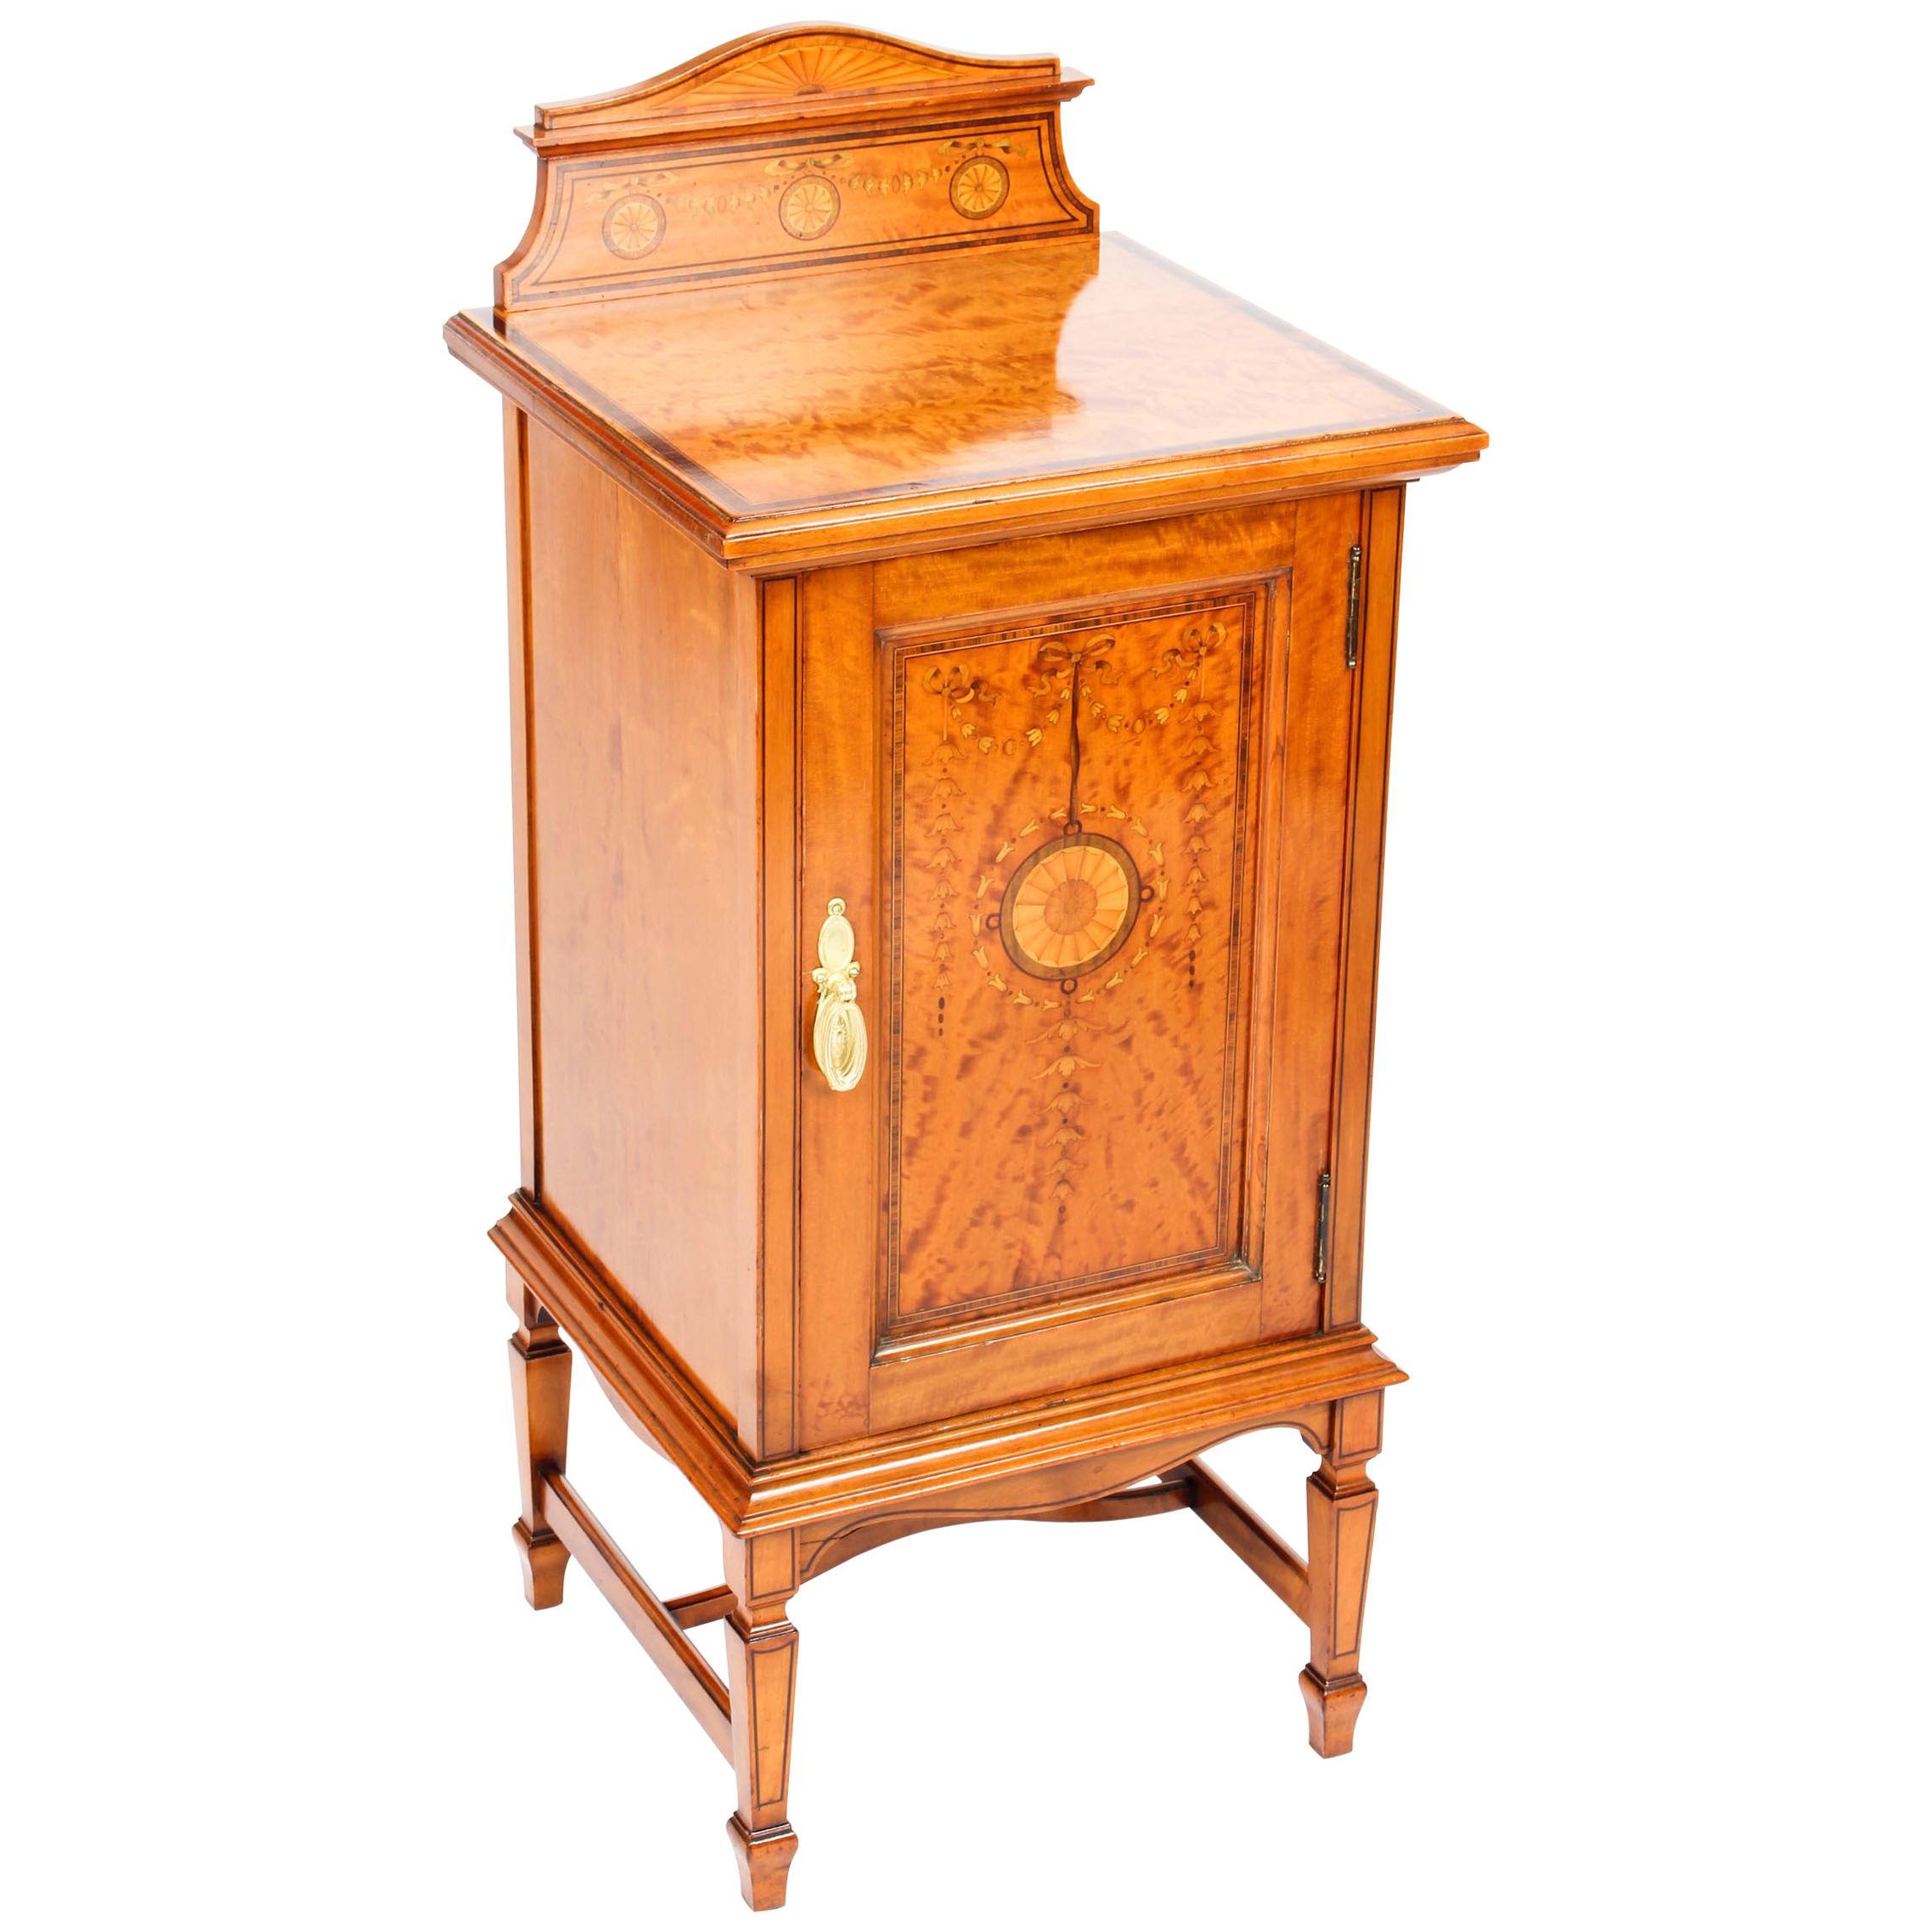 Antique Victorian Satinwood & Inlaid Bedside Cabinet, 19th Century For Sale